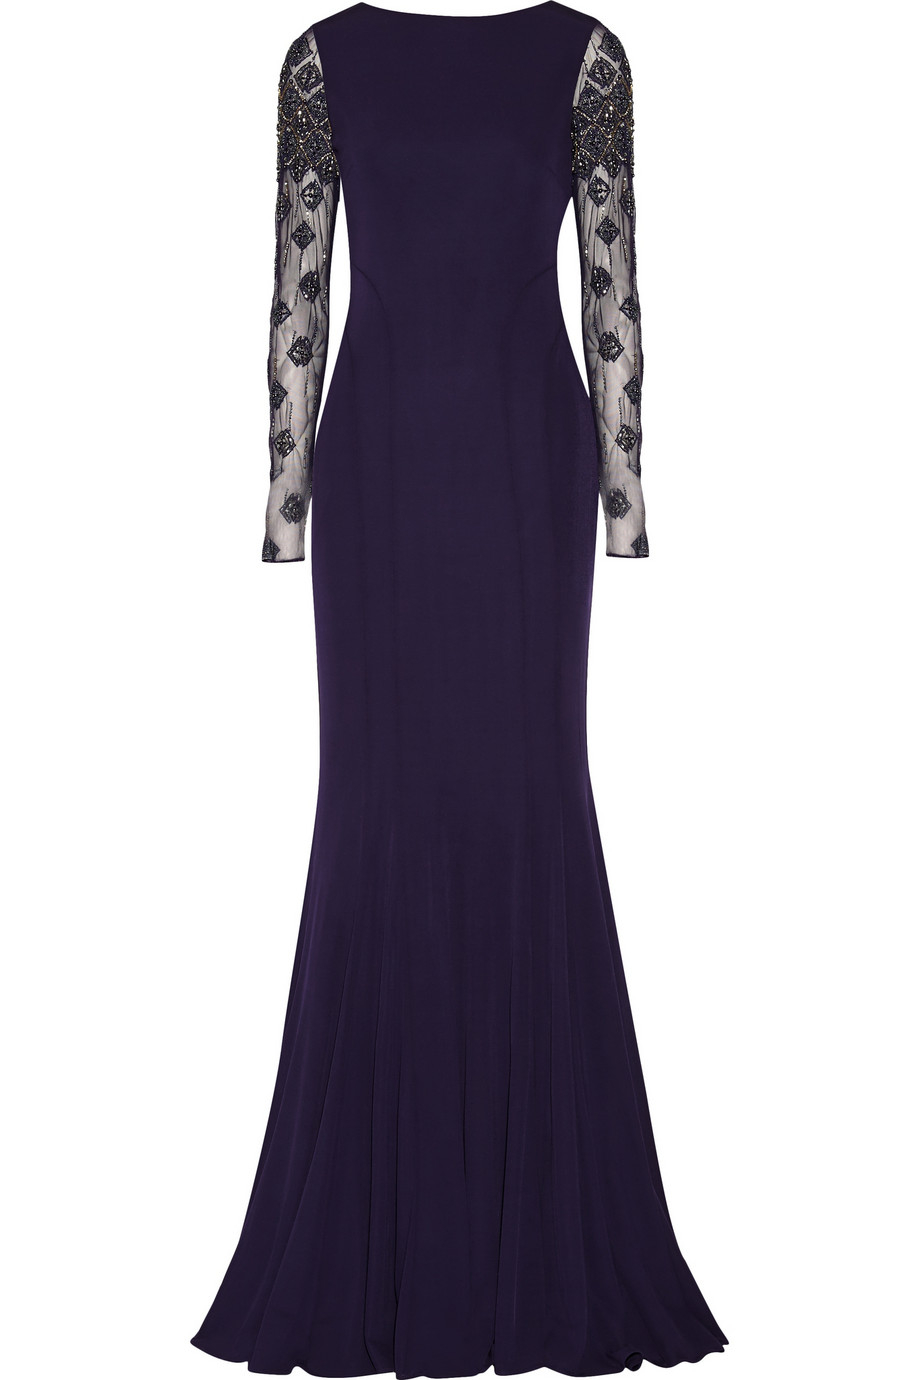 Lyst - Badgley mischka Embellished Tulle And Jersey Gown in Purple